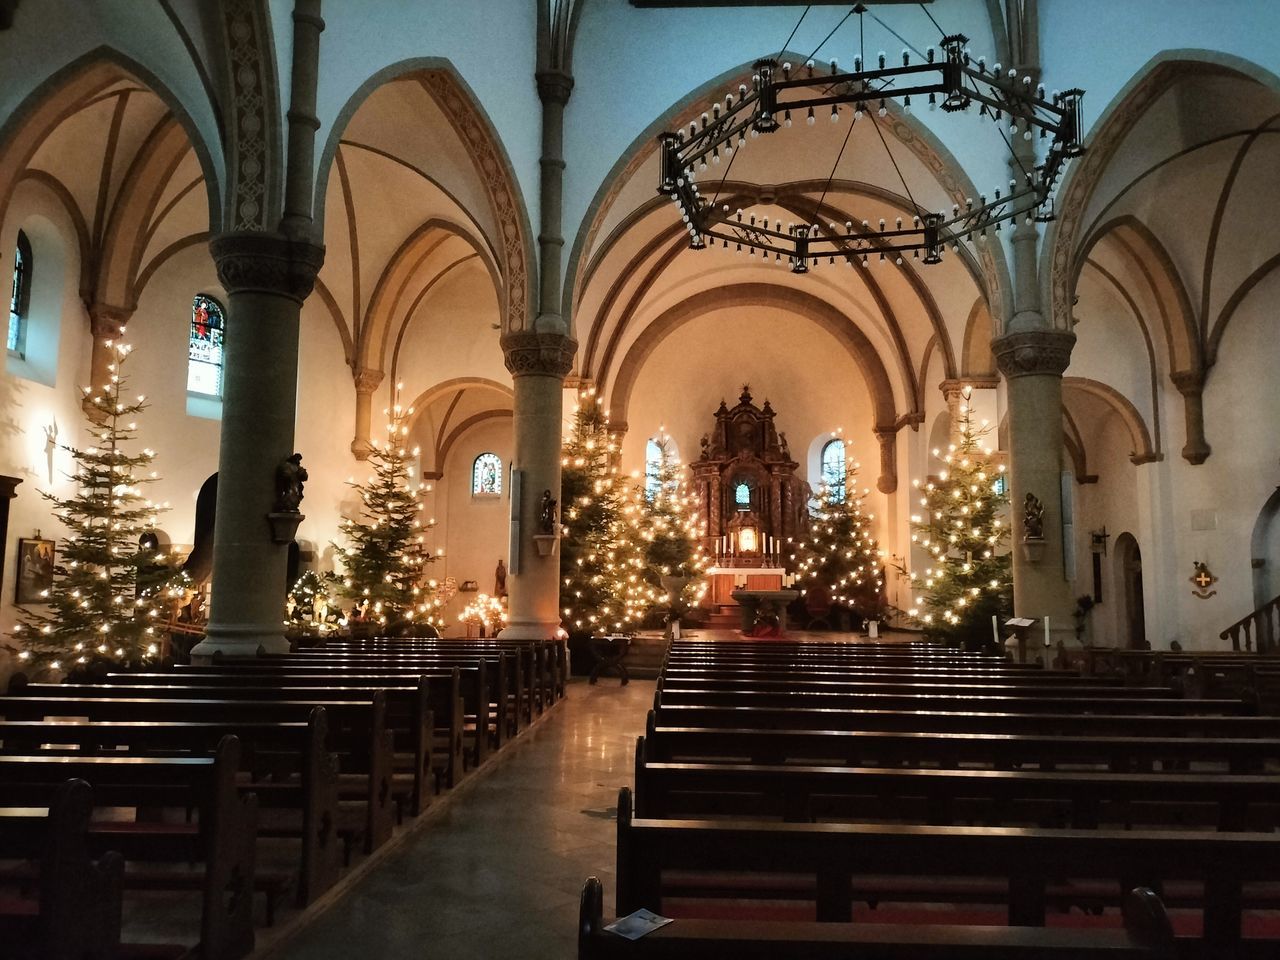 architecture, built structure, religion, place of worship, belief, spirituality, building, arch, pew, catholicism, indoors, worship, bench, no people, staircase, seat, illuminated, travel destinations, altar, aisle, candle, lighting equipment